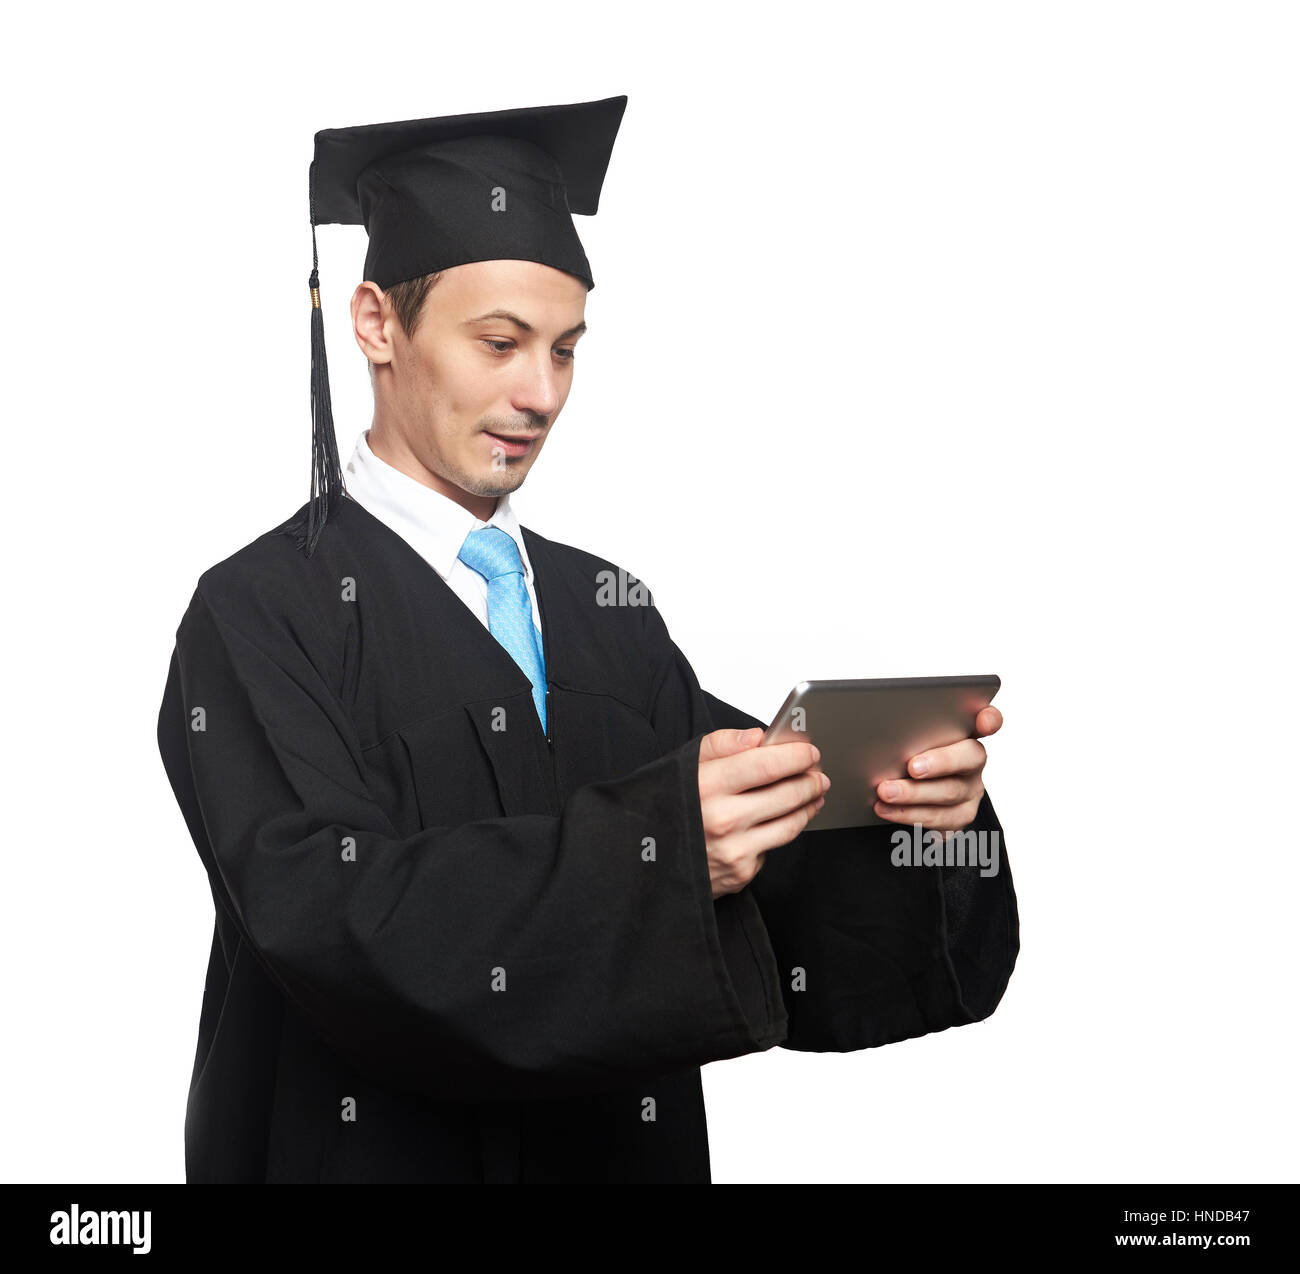 Graduation student with tablet isolated on white background Stock Photo